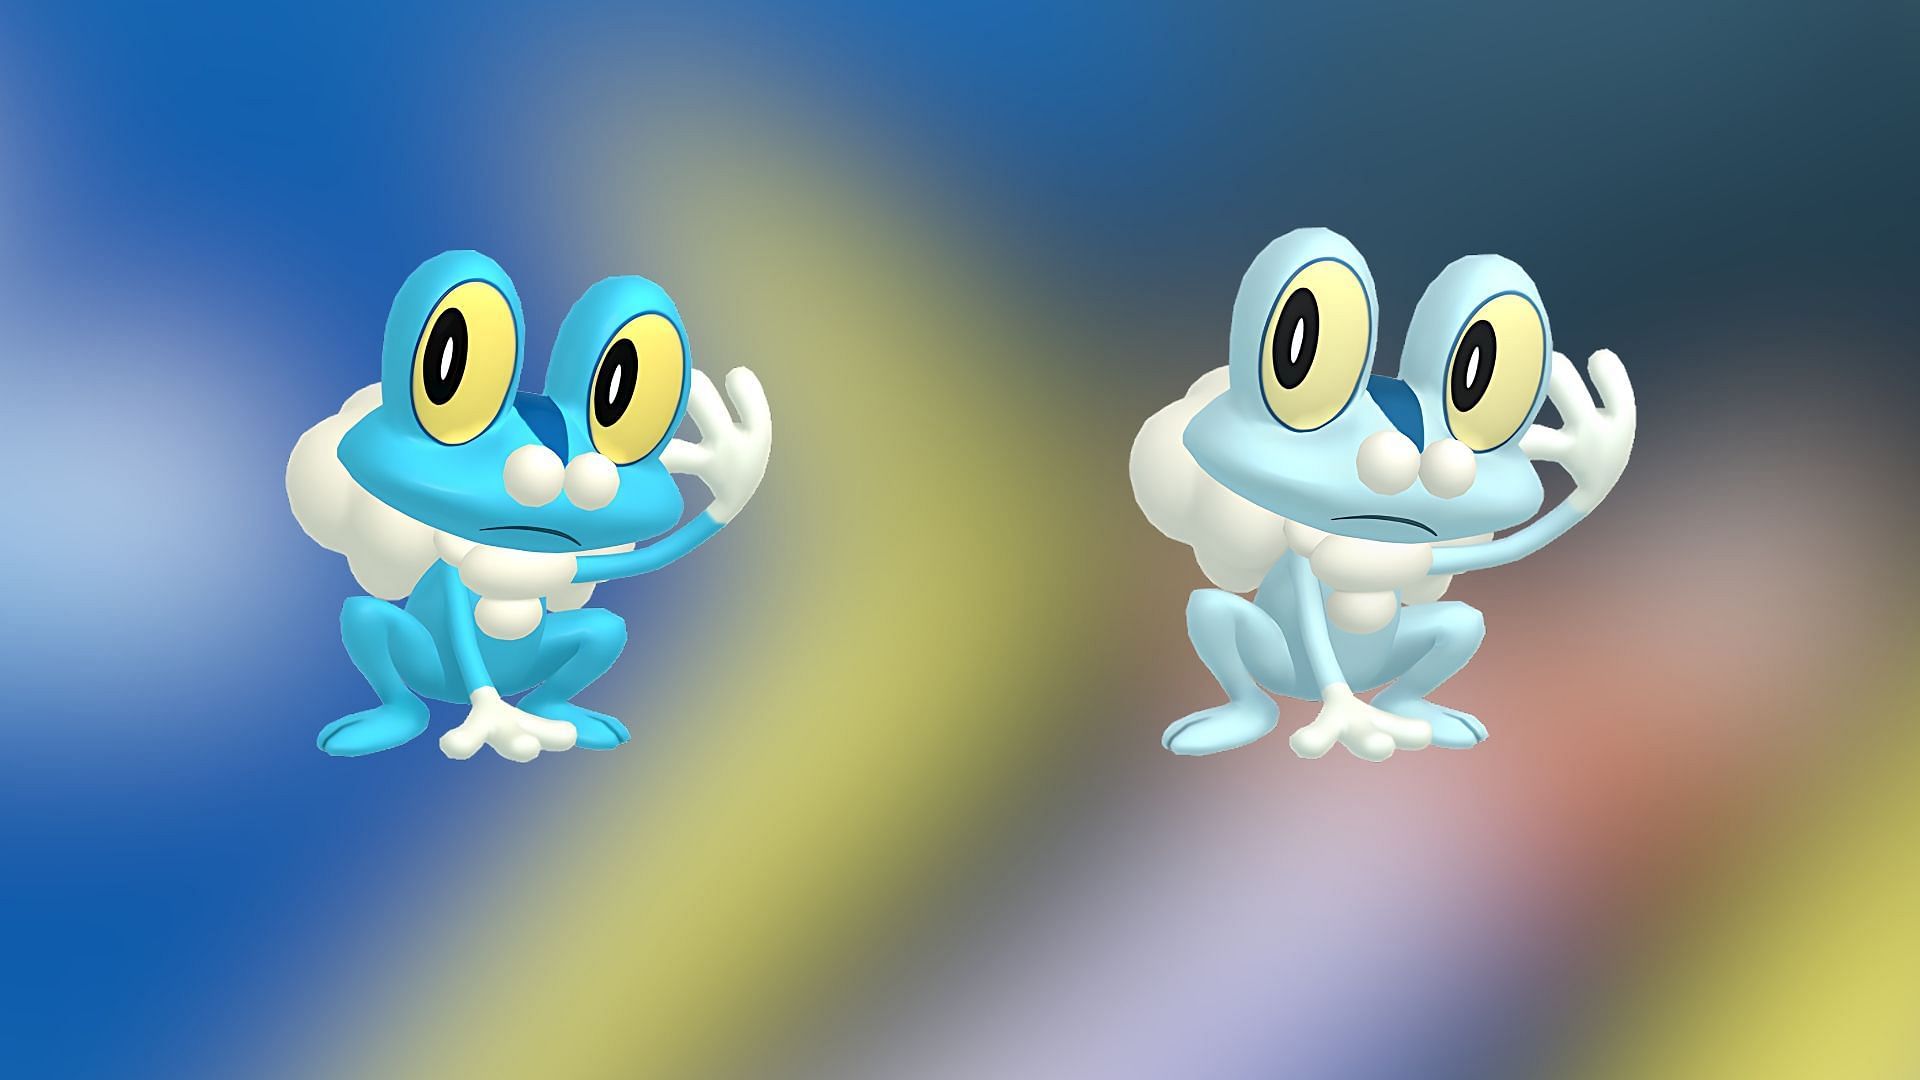 Froakie and shiny Froakie, as they appear in the game (Image via TPC)